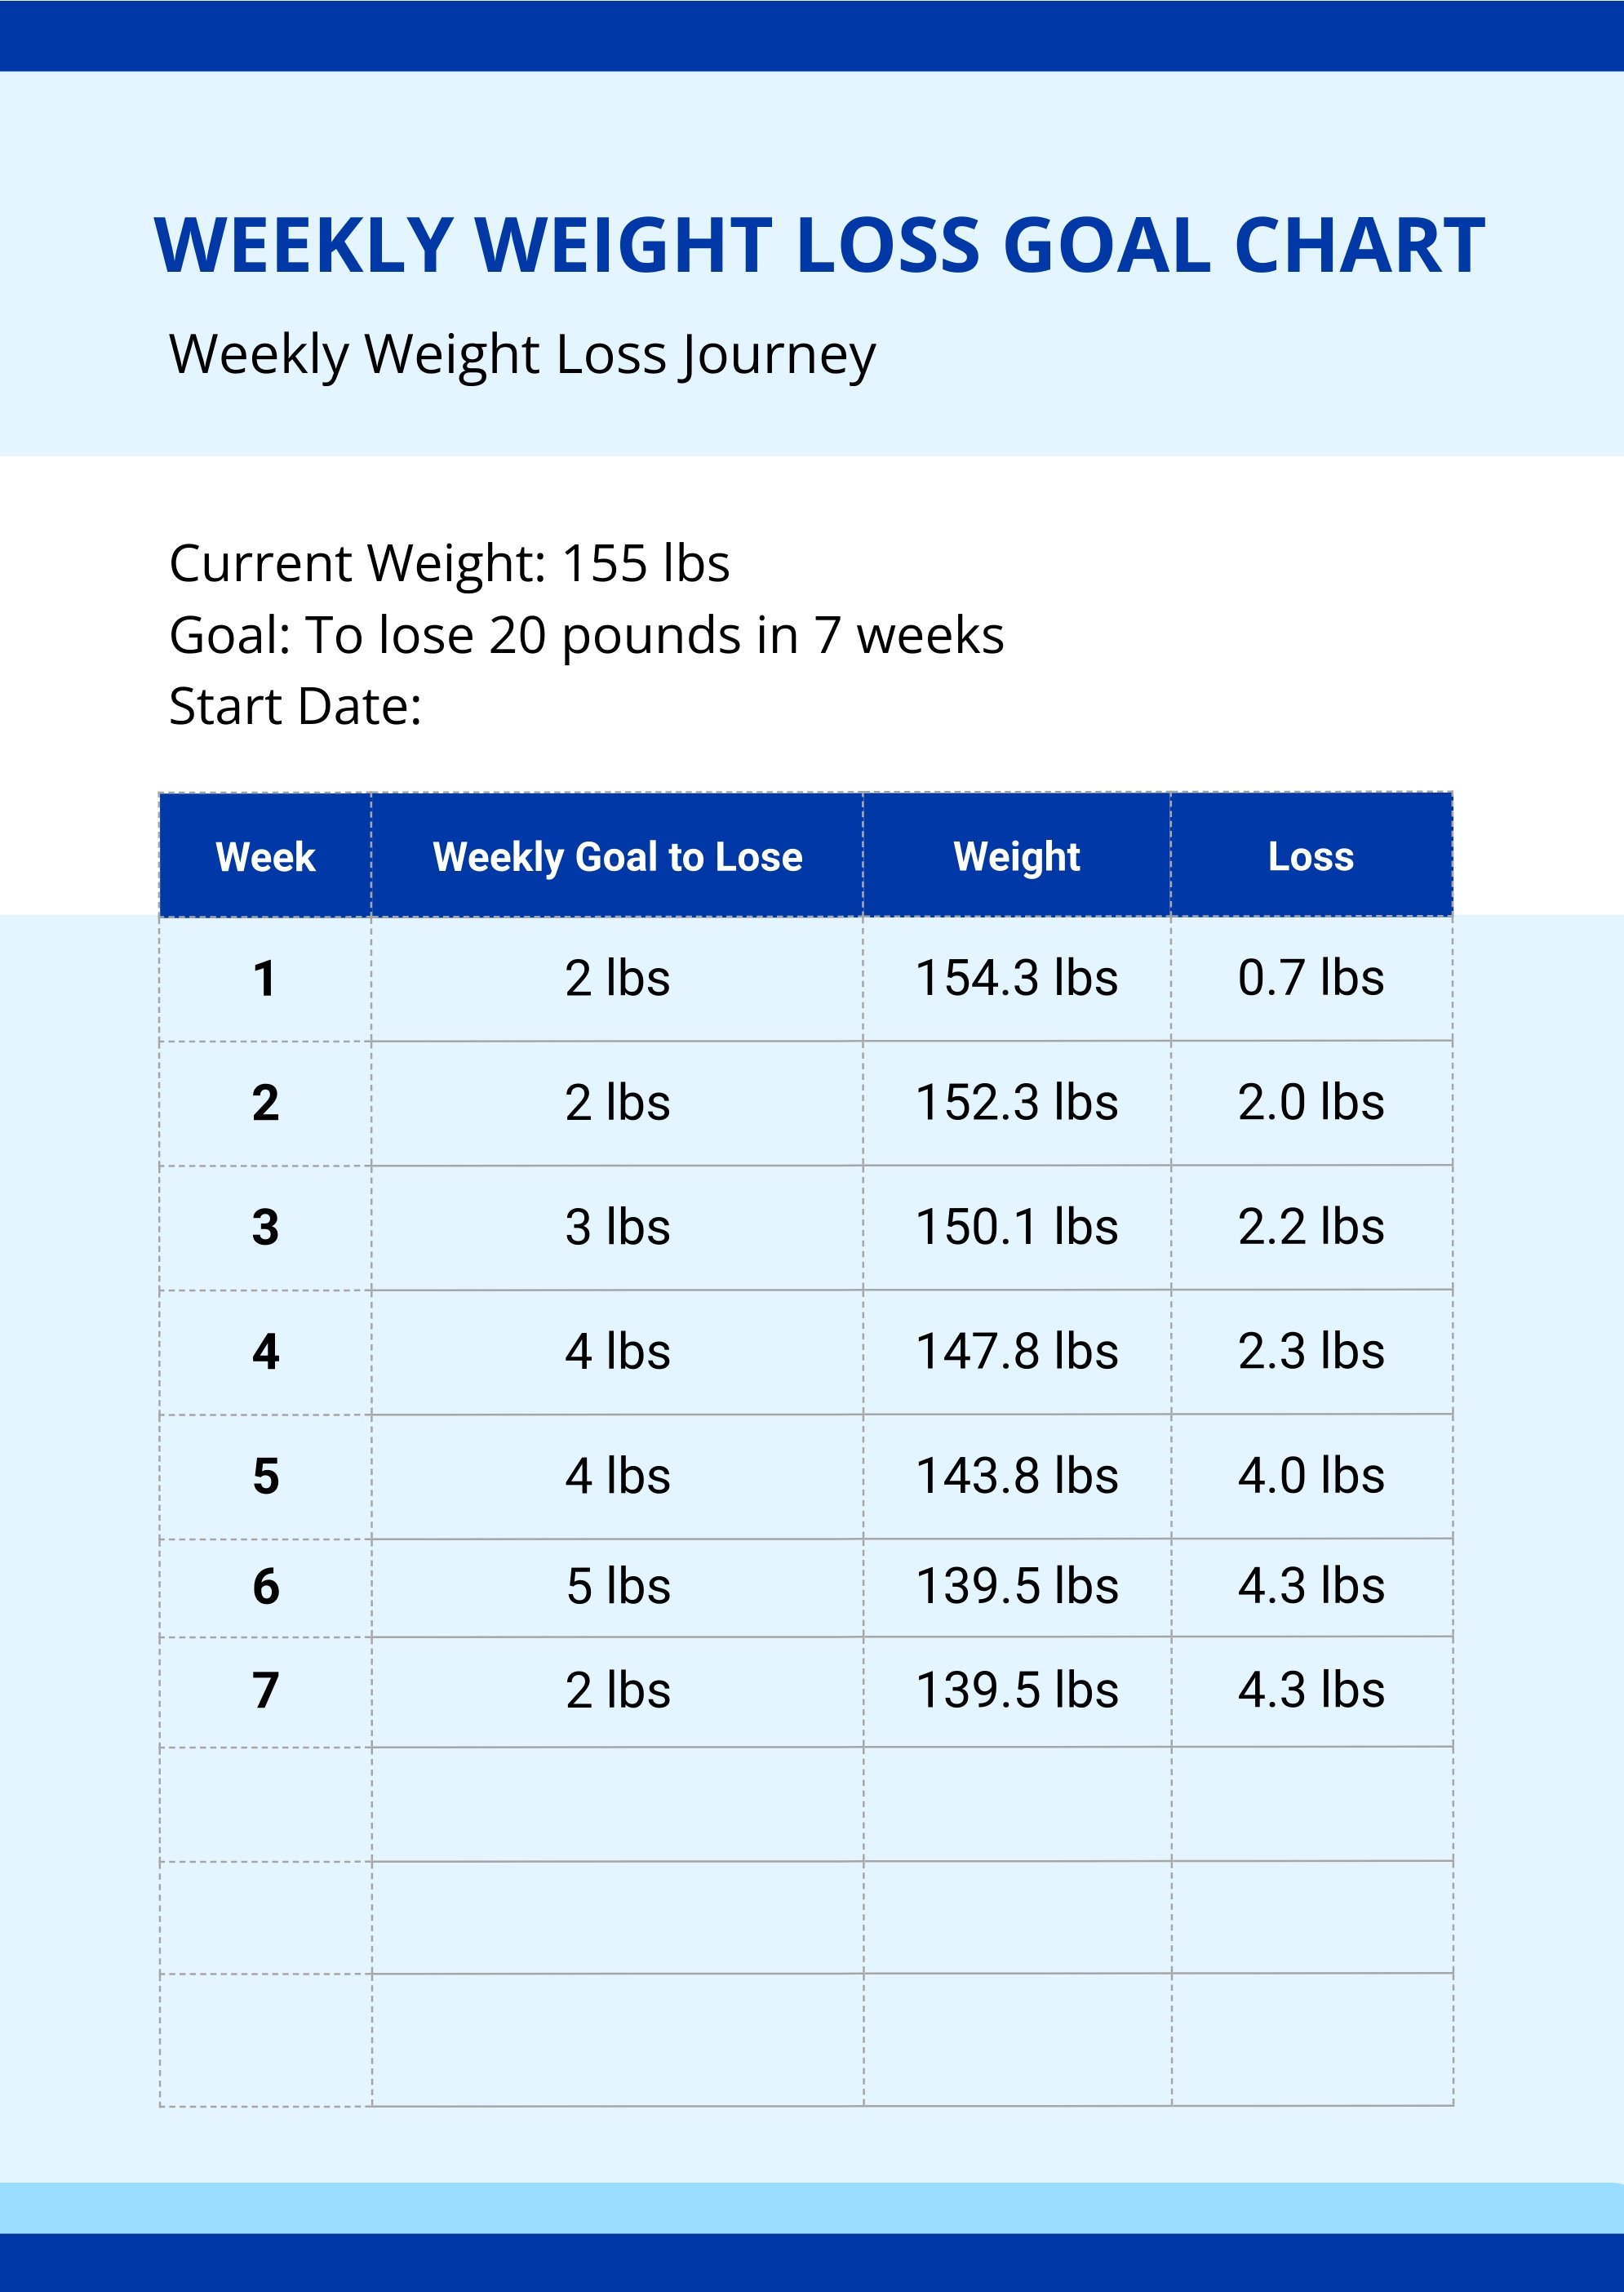 Weekly Weight Loss Goal Chart in PDF, Illustrator